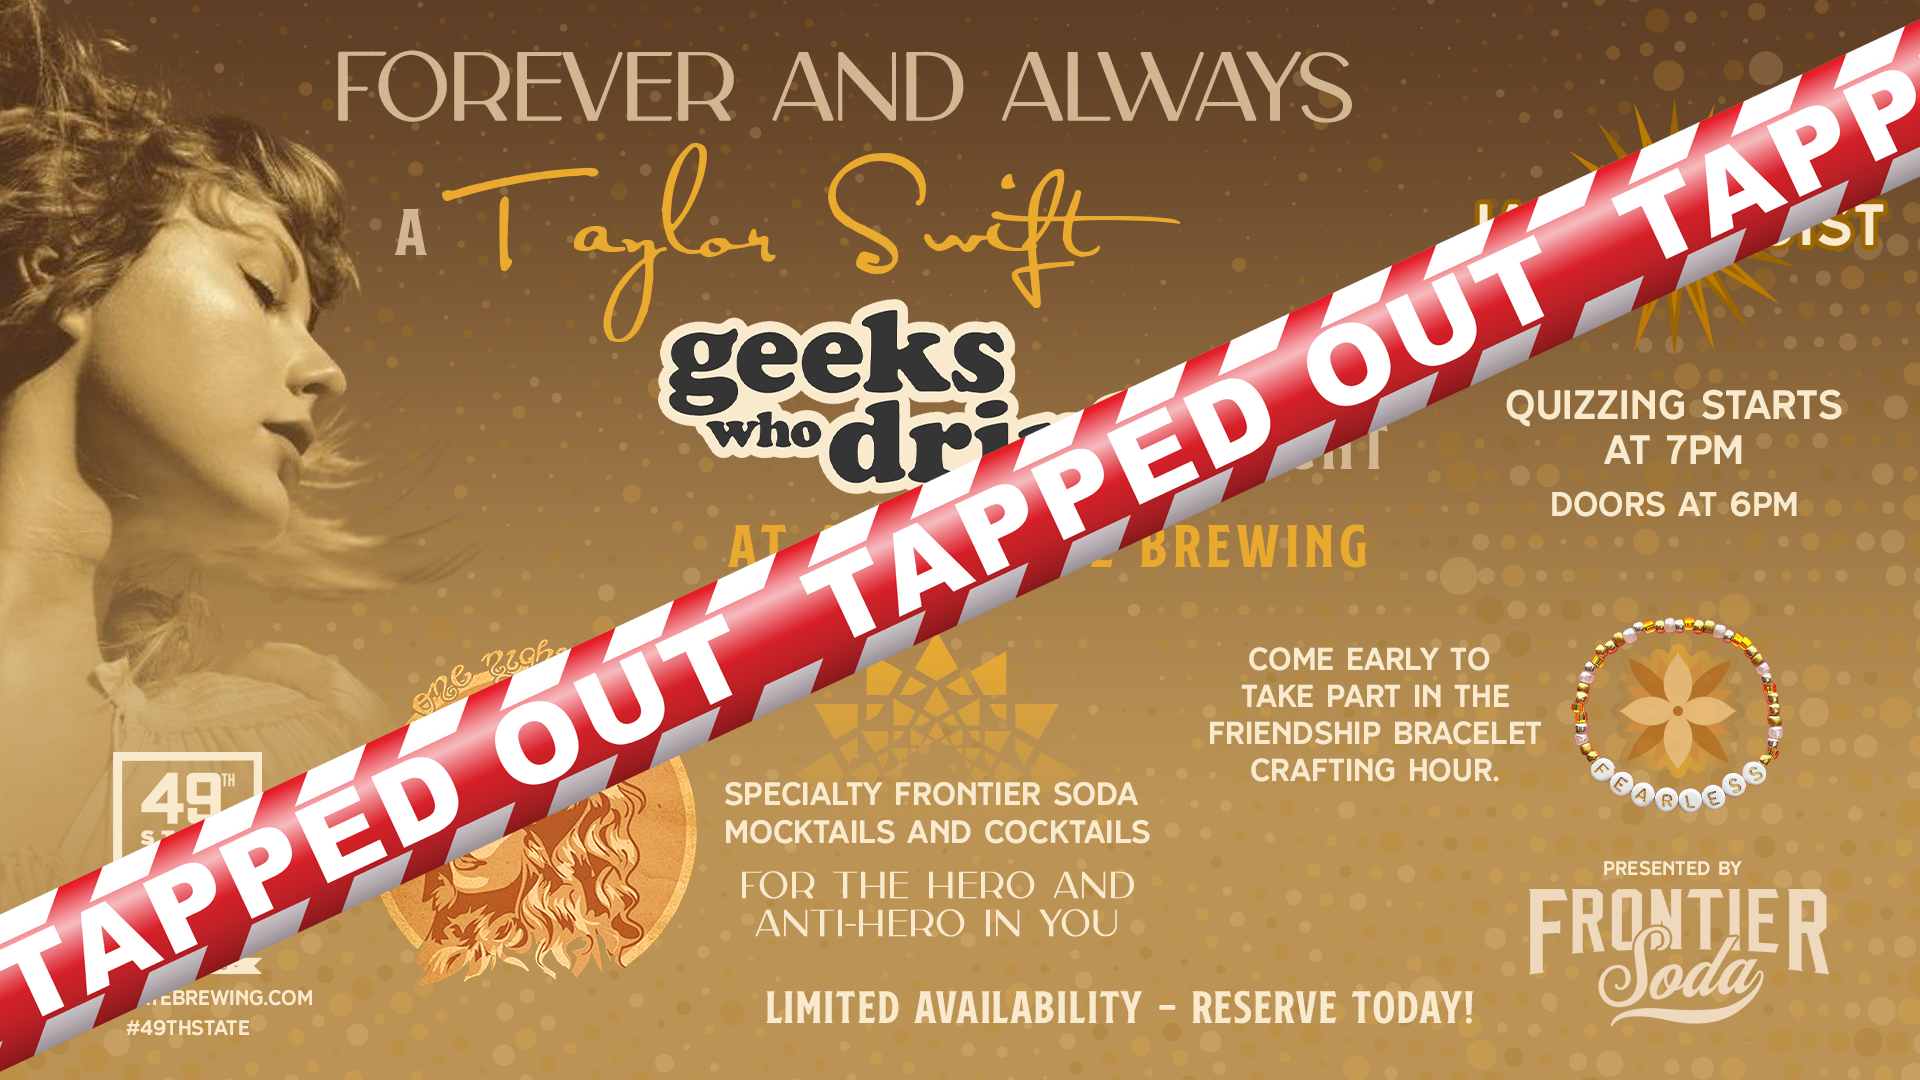 49th State Brewing, geeks who drink, taylor swift, swifties, downtown brewpub